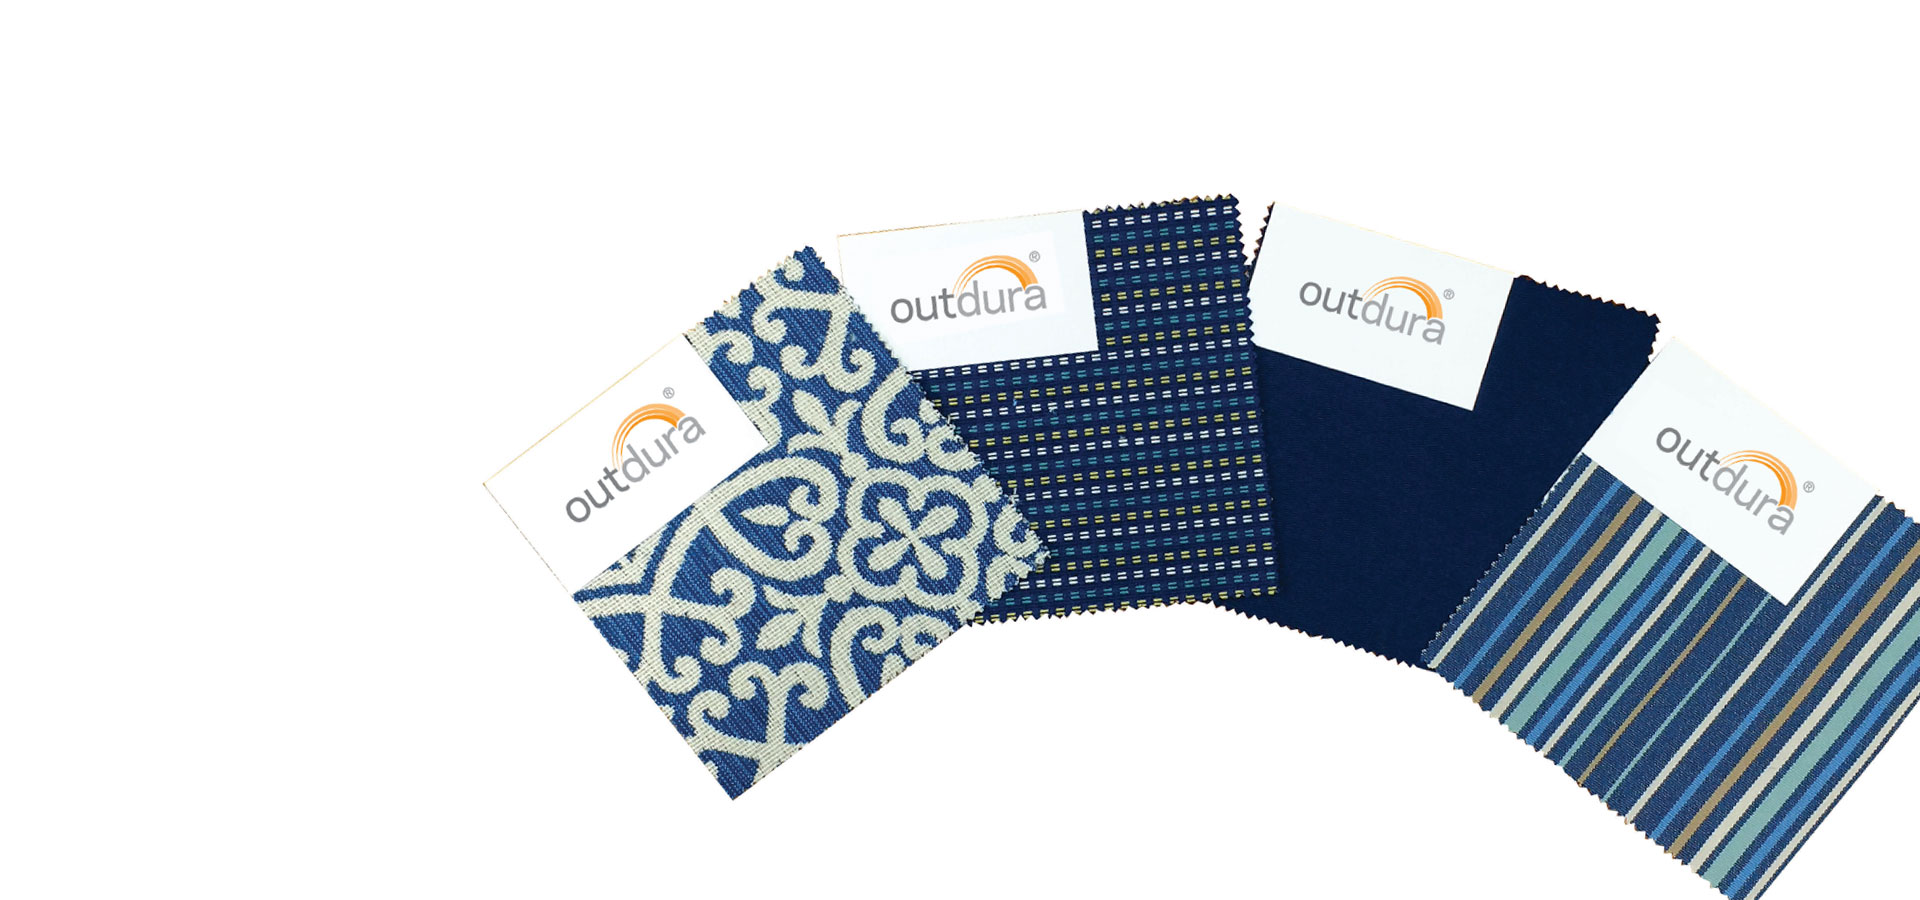 Outdura’s fabrics are superior in quality, hand and performance. See for yourself - Request a fabric sample.